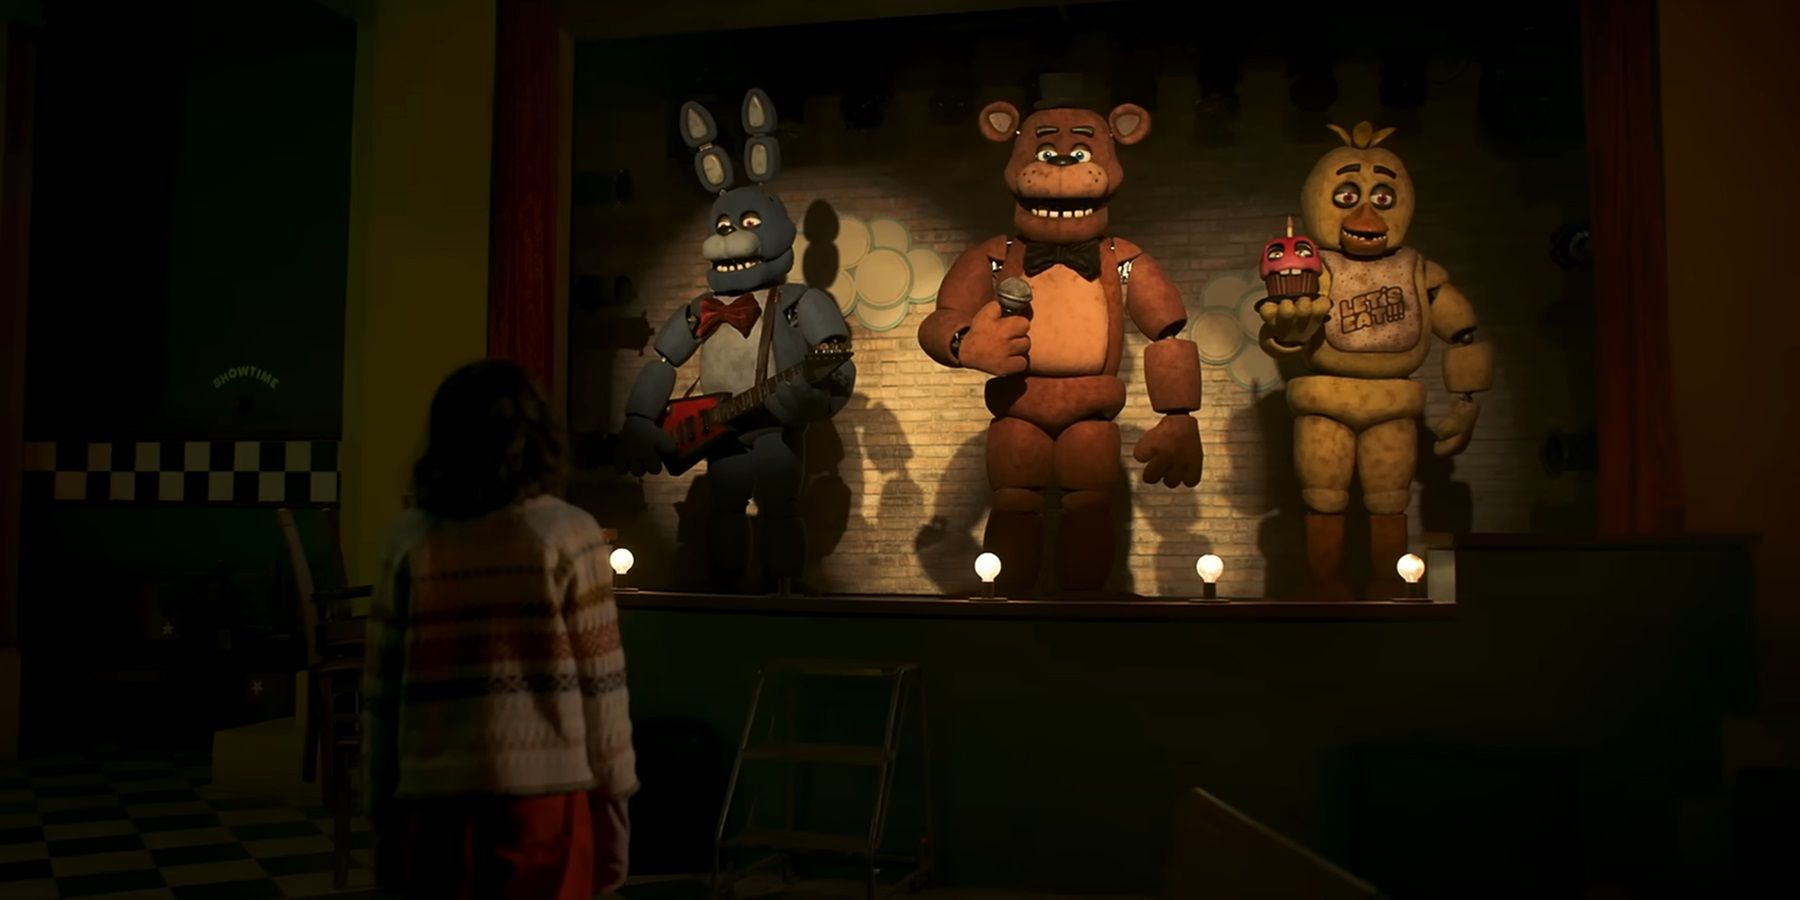 Five Nights at Freddy's No. 1 for second week box office